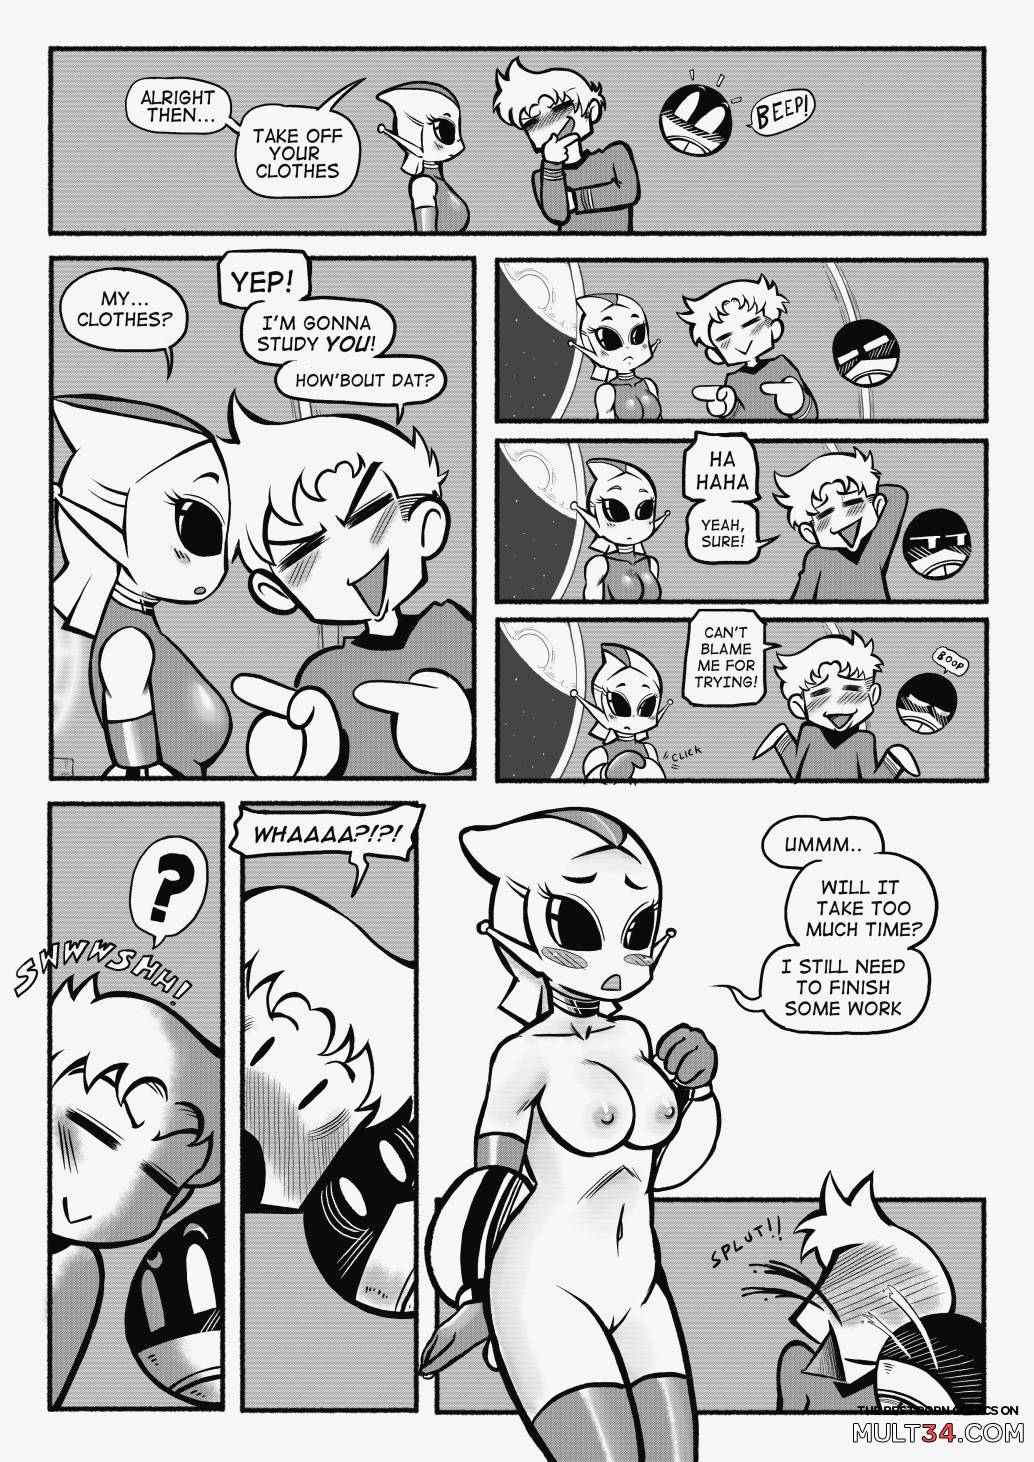 Abducted! - Mr.E page 12